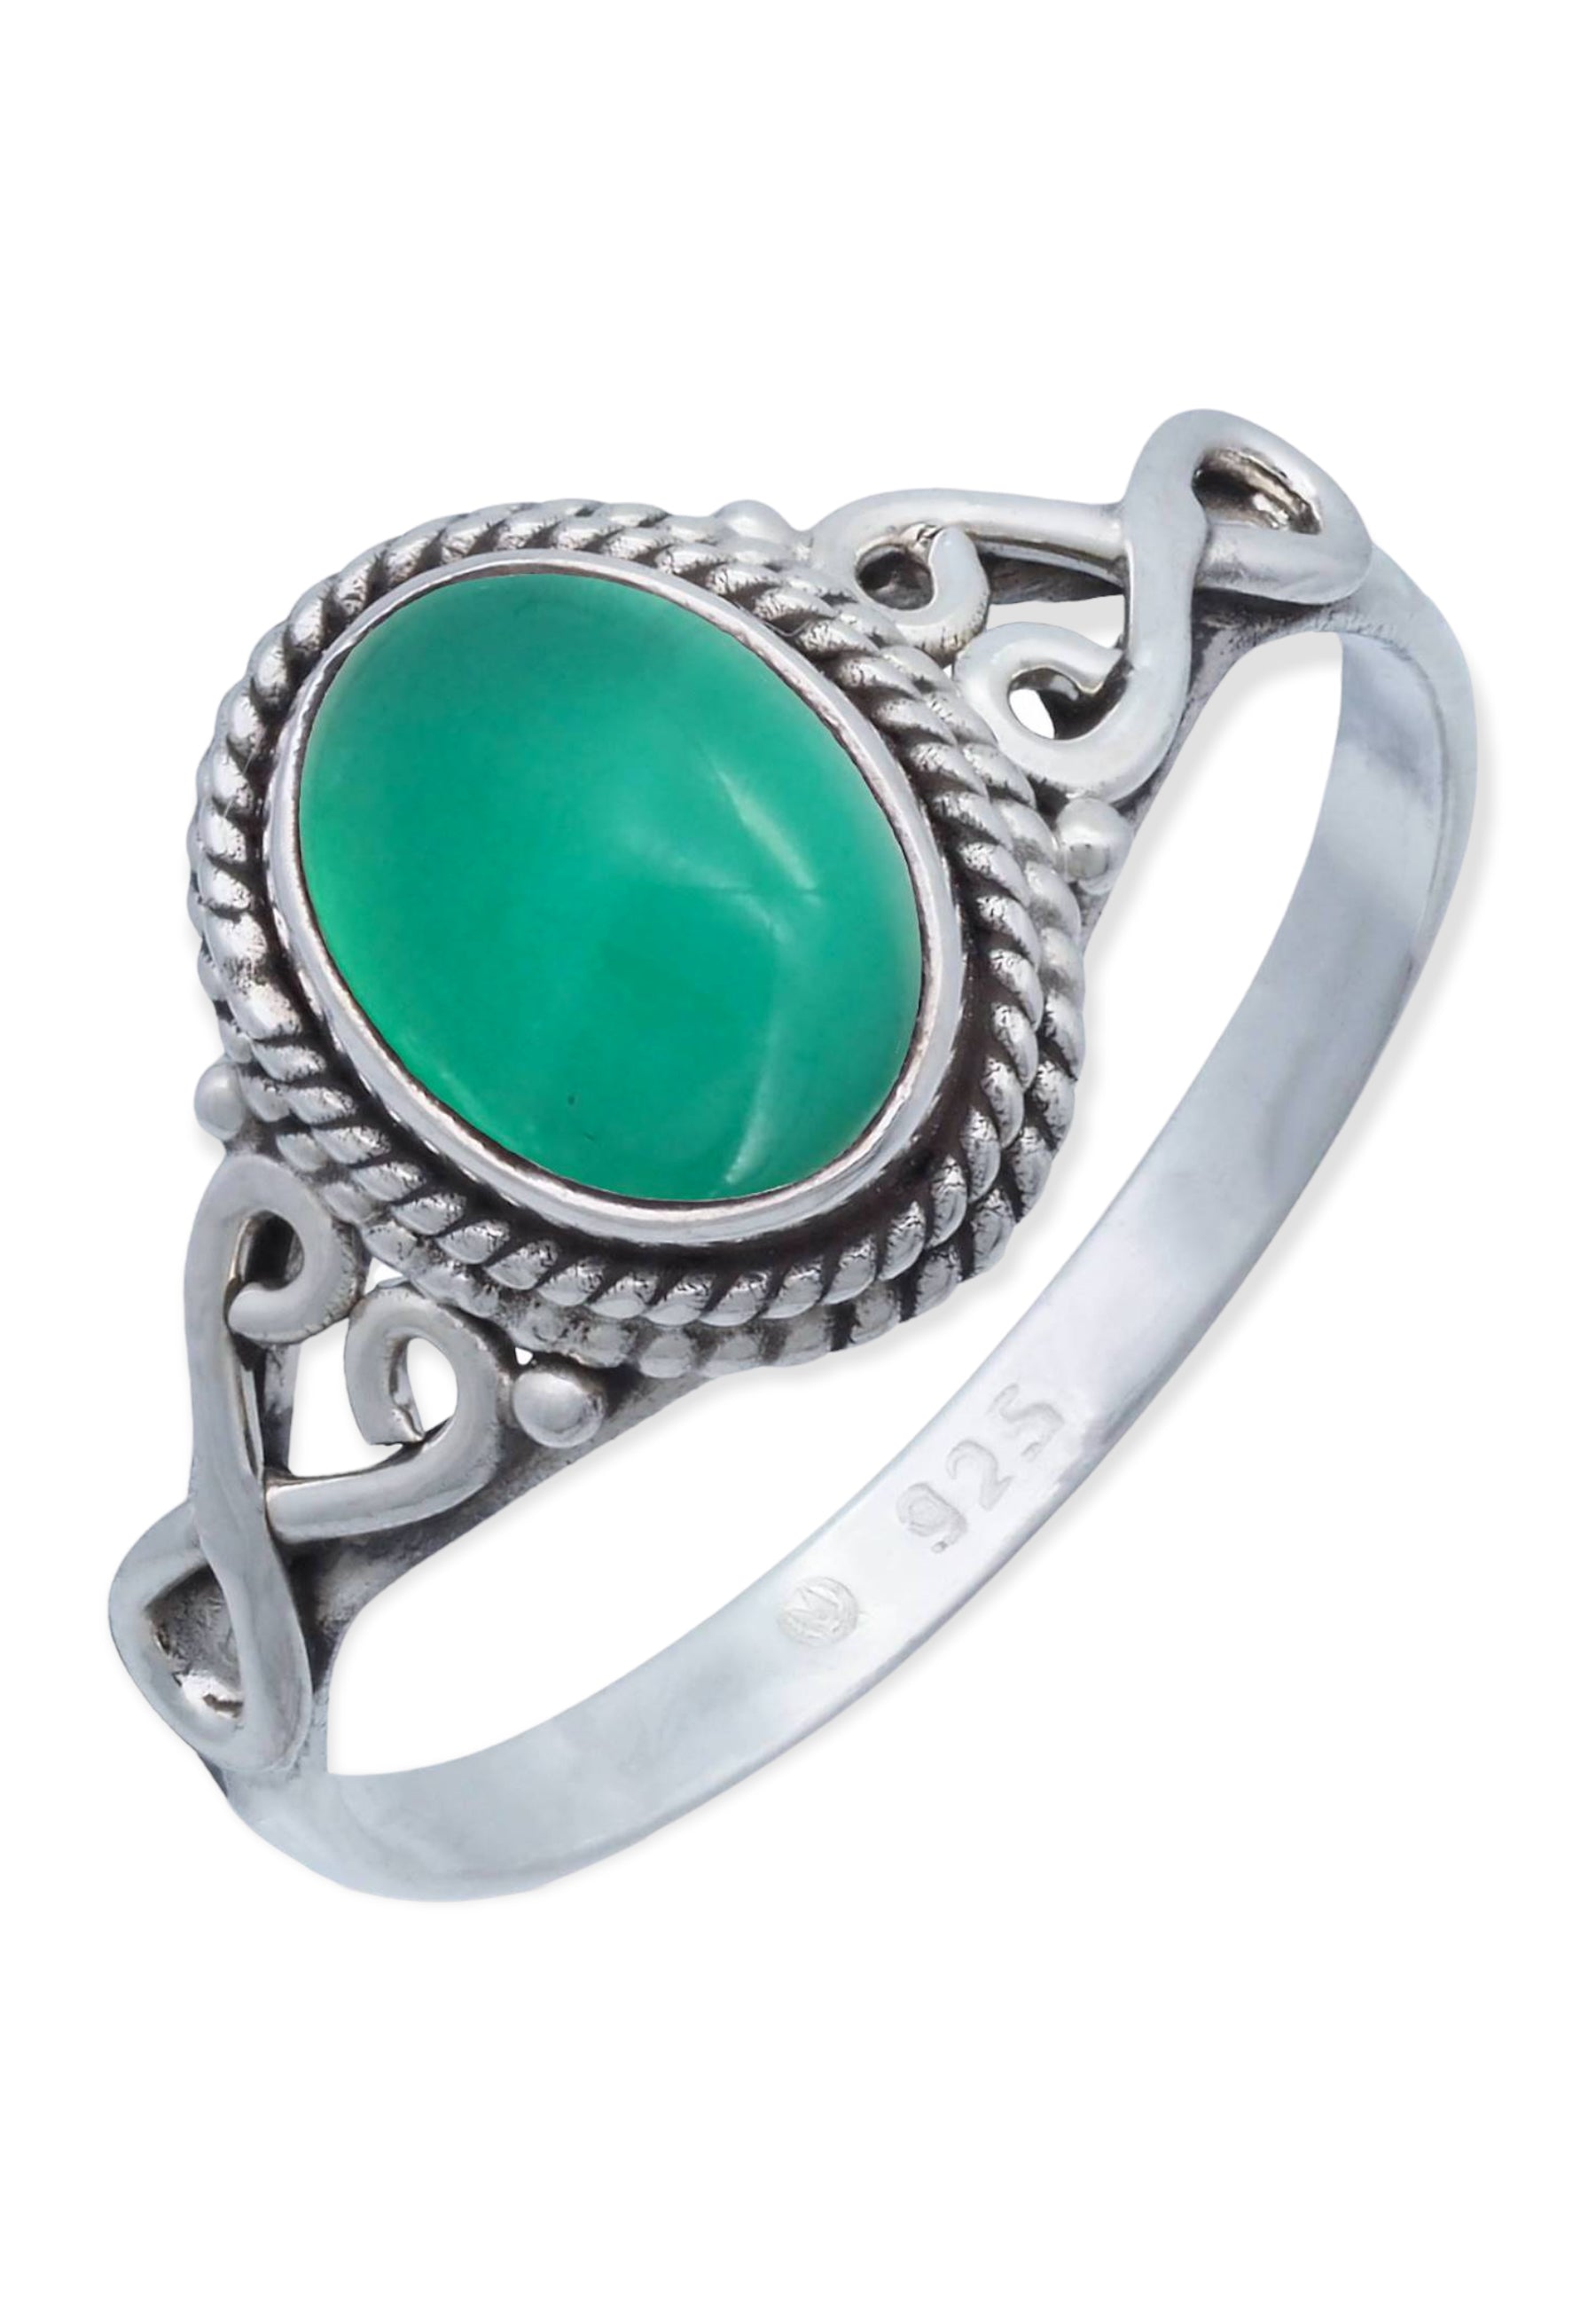 Ring BAGHIMI oval made of 925 sterling silver